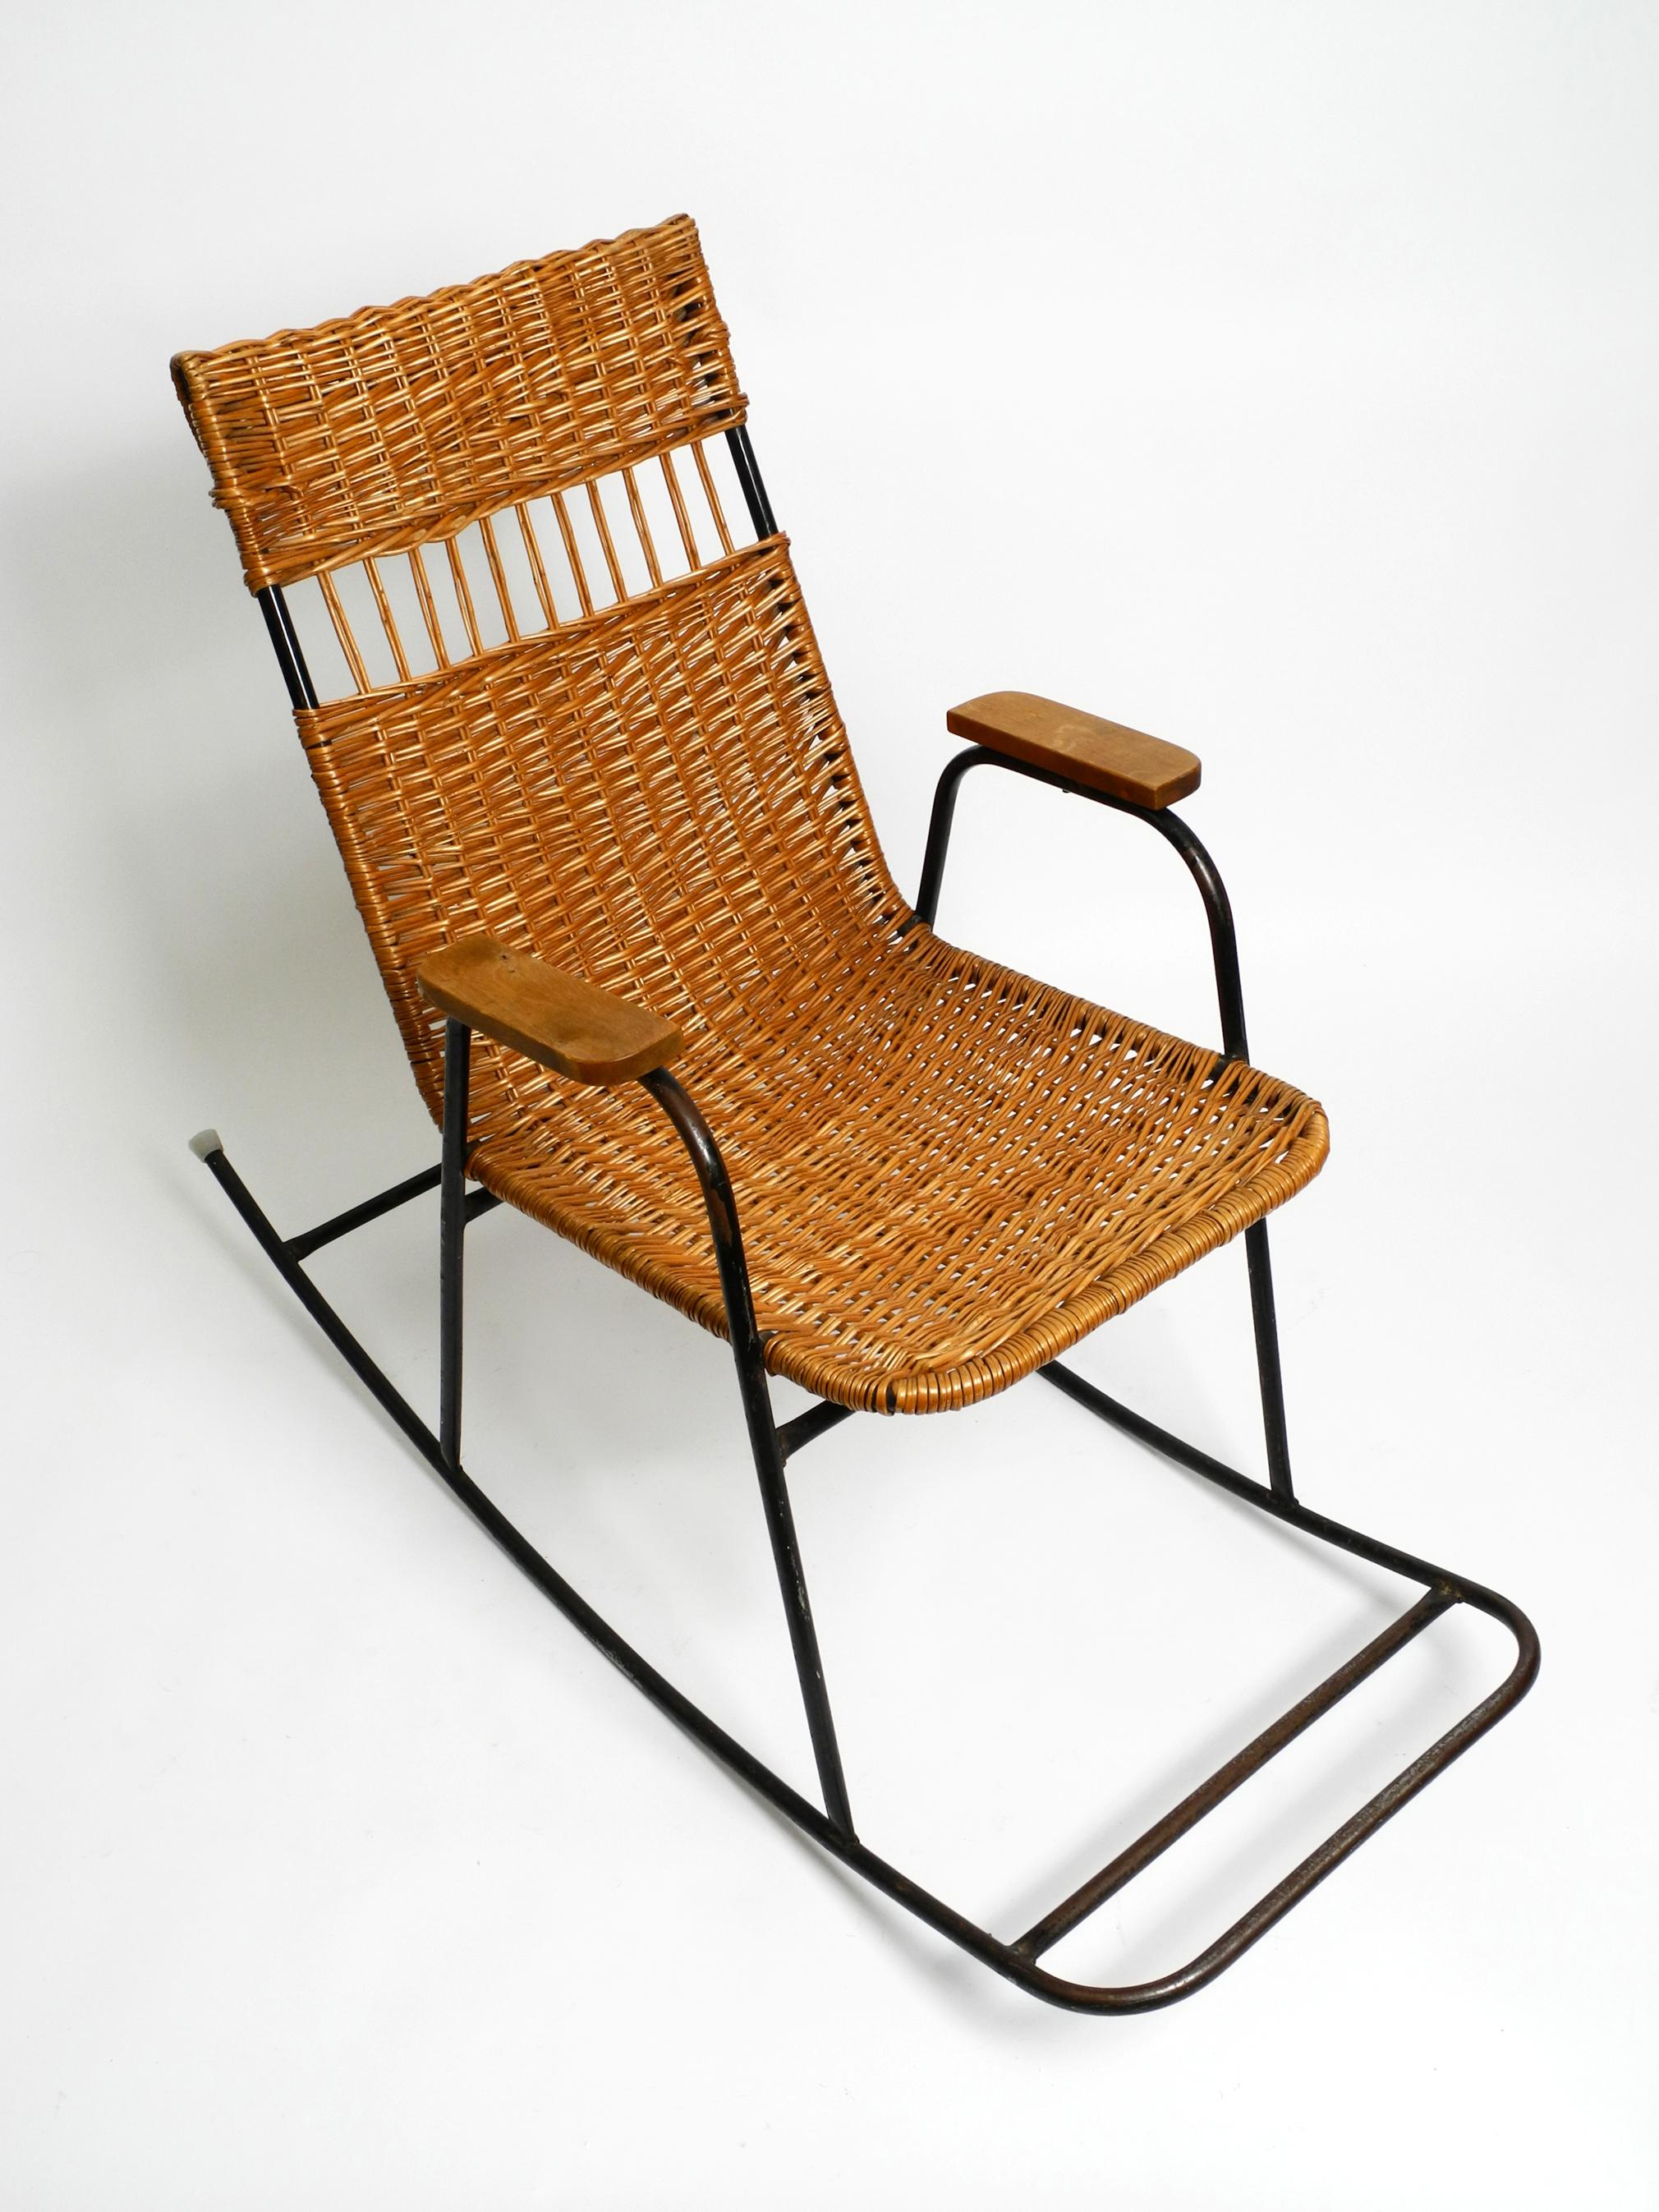 Mid-20th Century Mid-Century Modern Rocking Chair Made of Black Painted Metal and Rattan For Sale